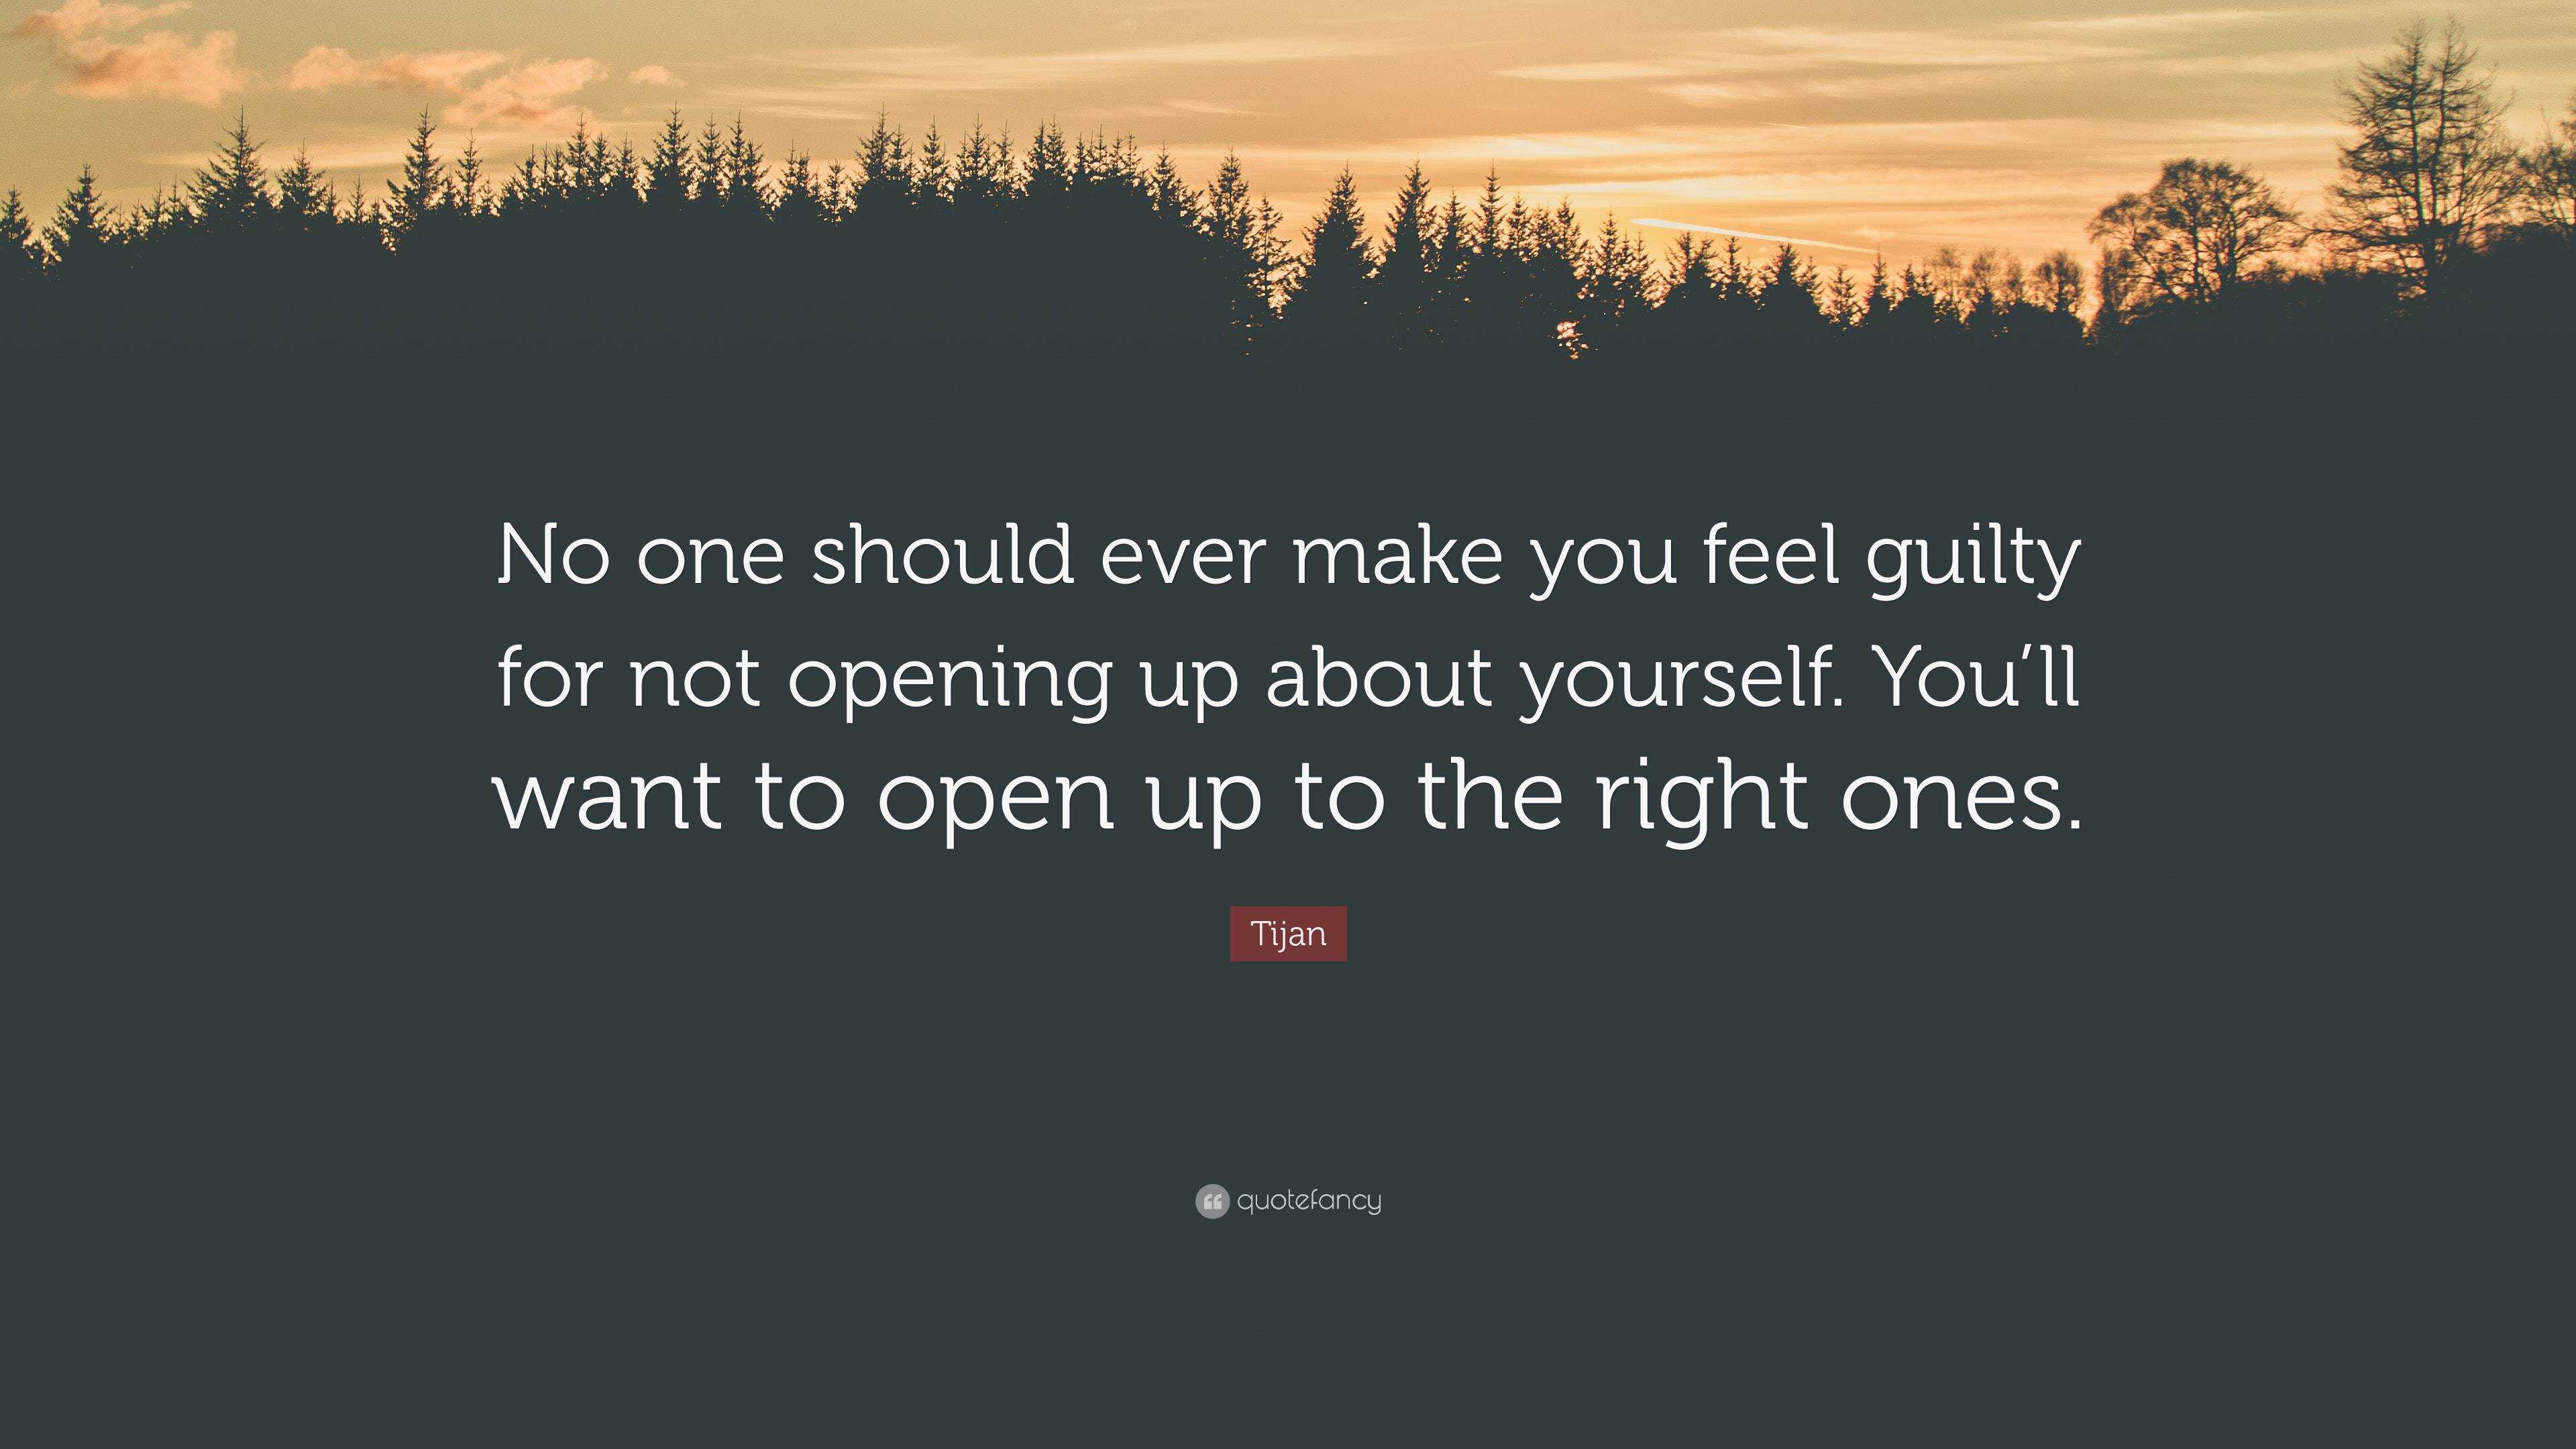 Tijan Quote: “No one should ever make you feel guilty for not opening up  about yourself.